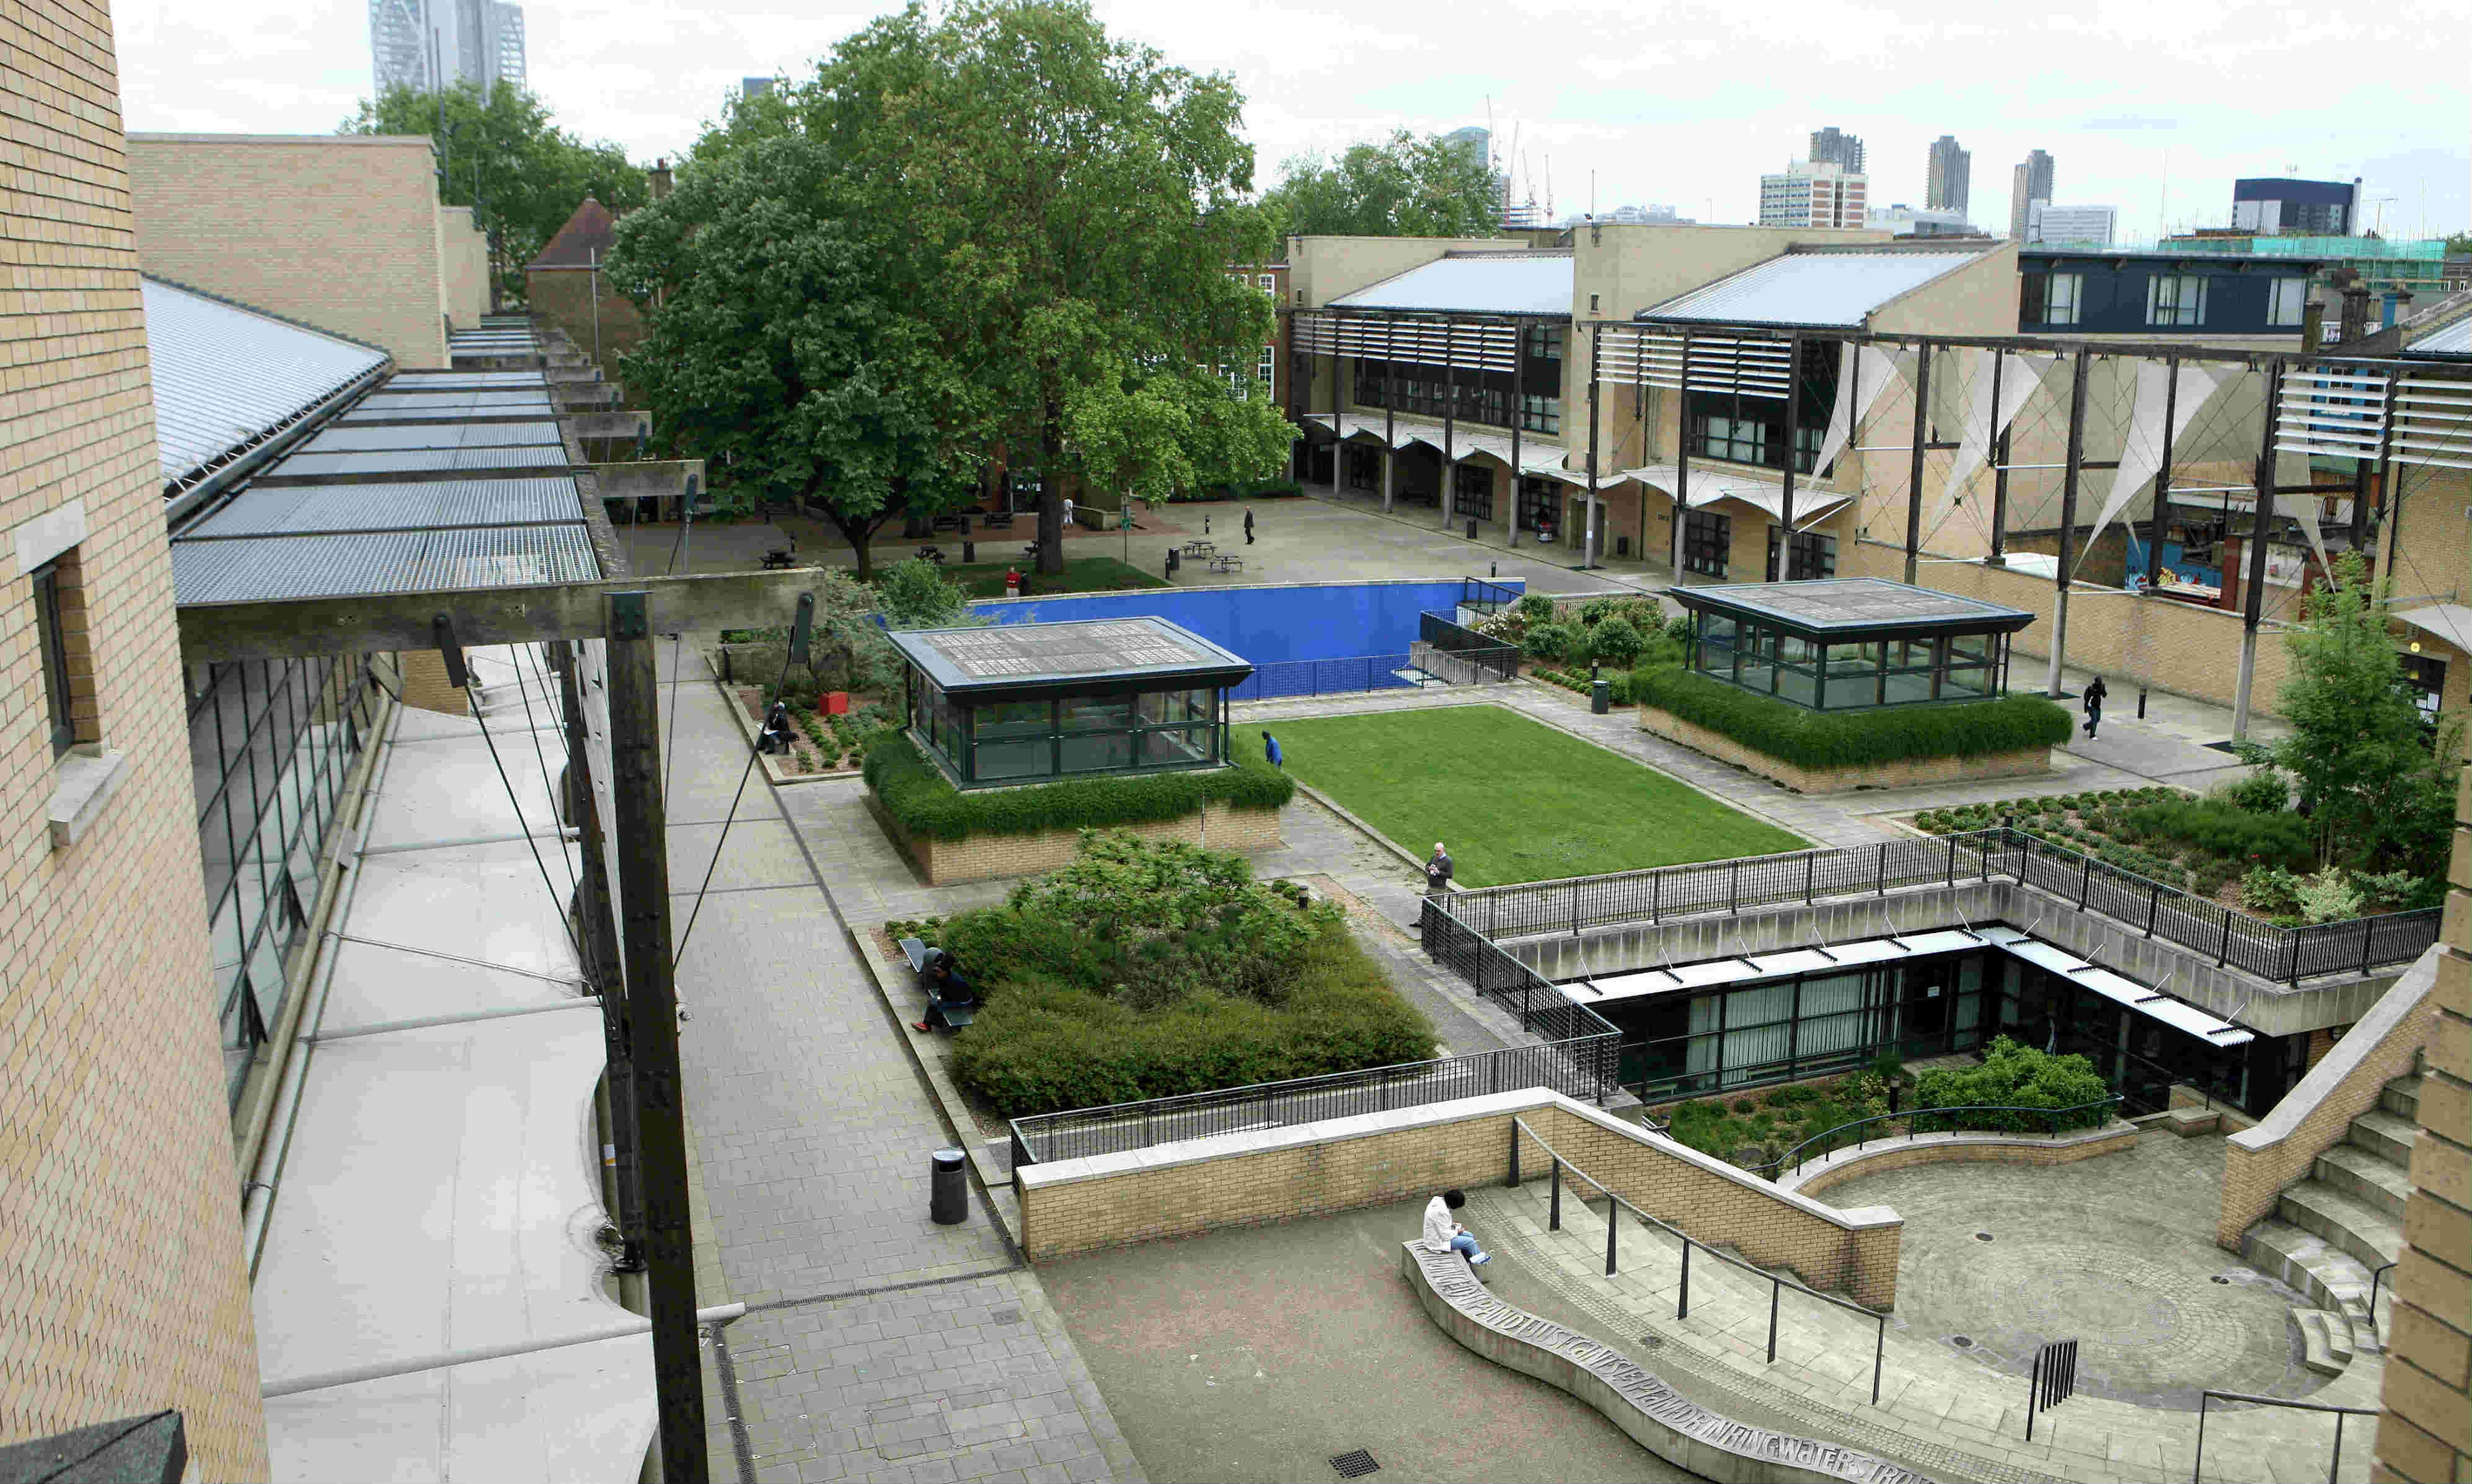 Energys Group saves Hackney Community College 320 tonnes of CO2